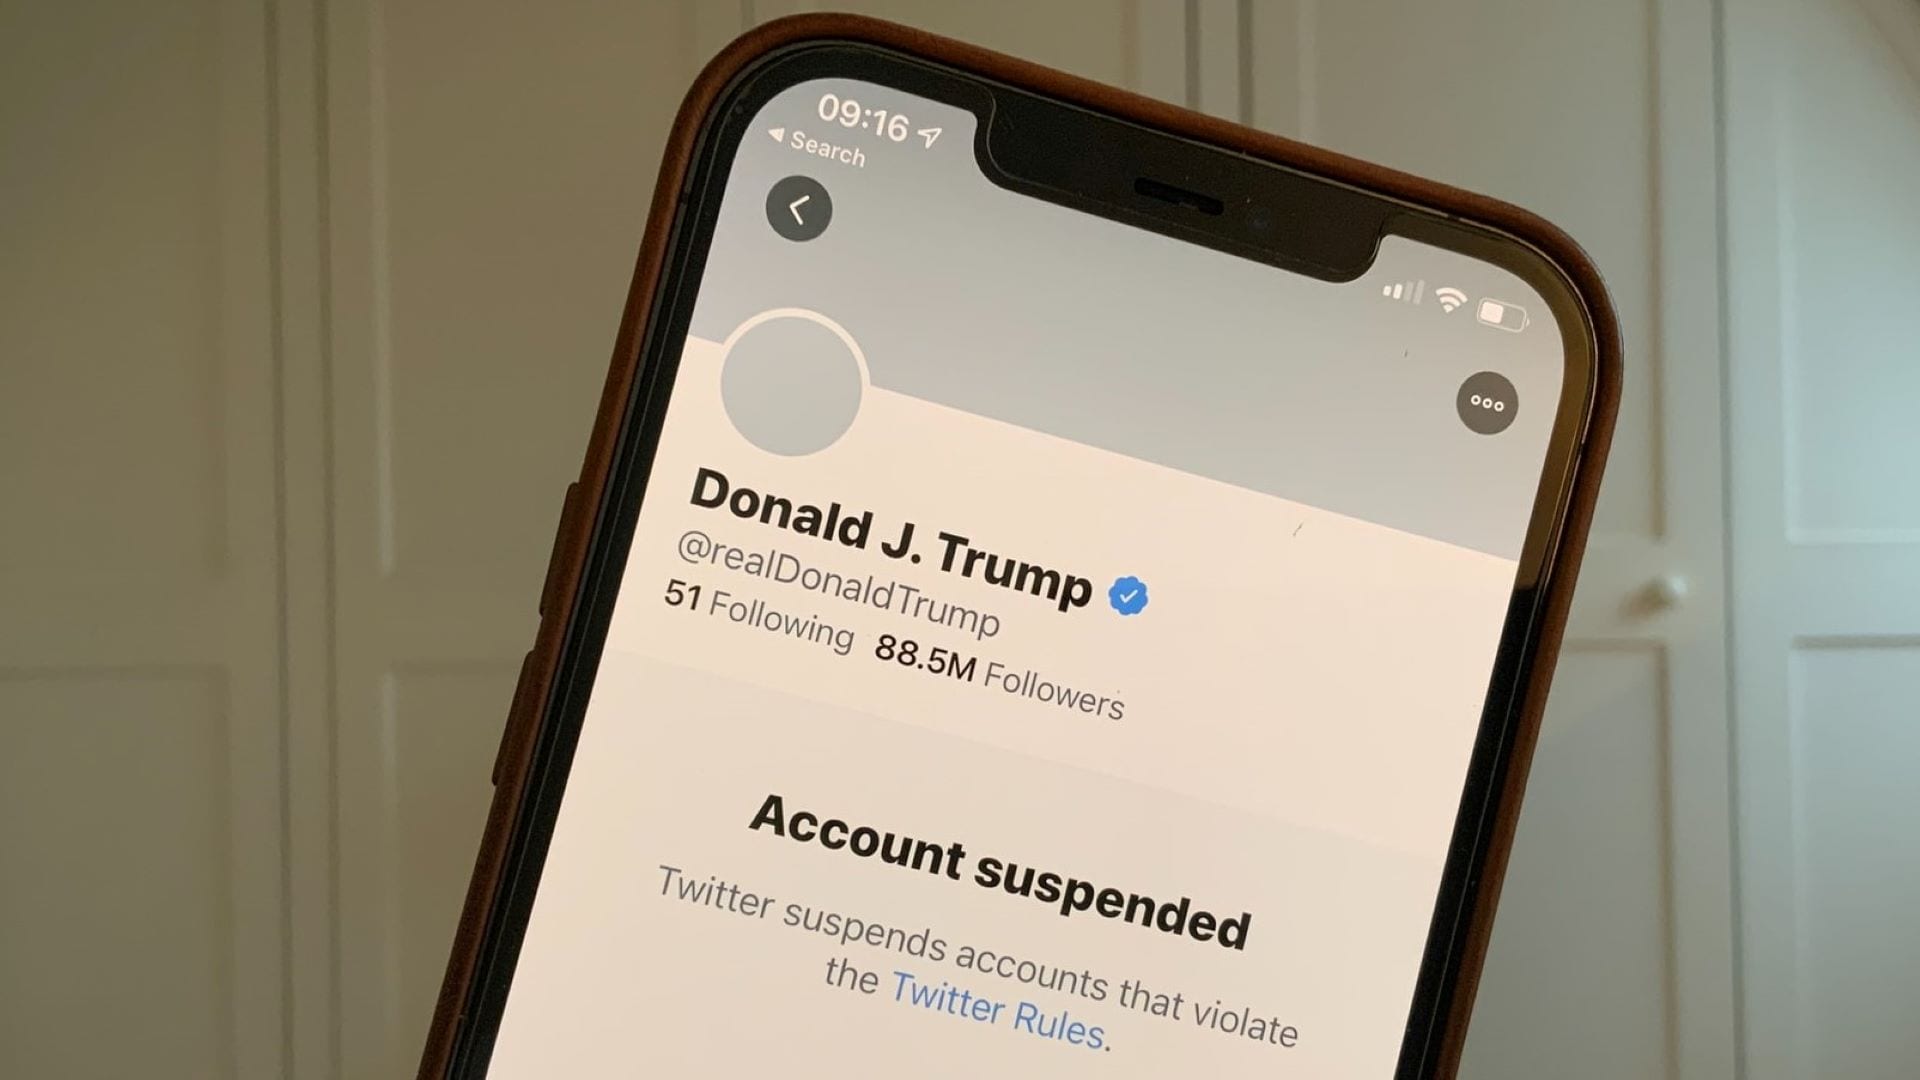 Donald Trump has been banned from Twitter